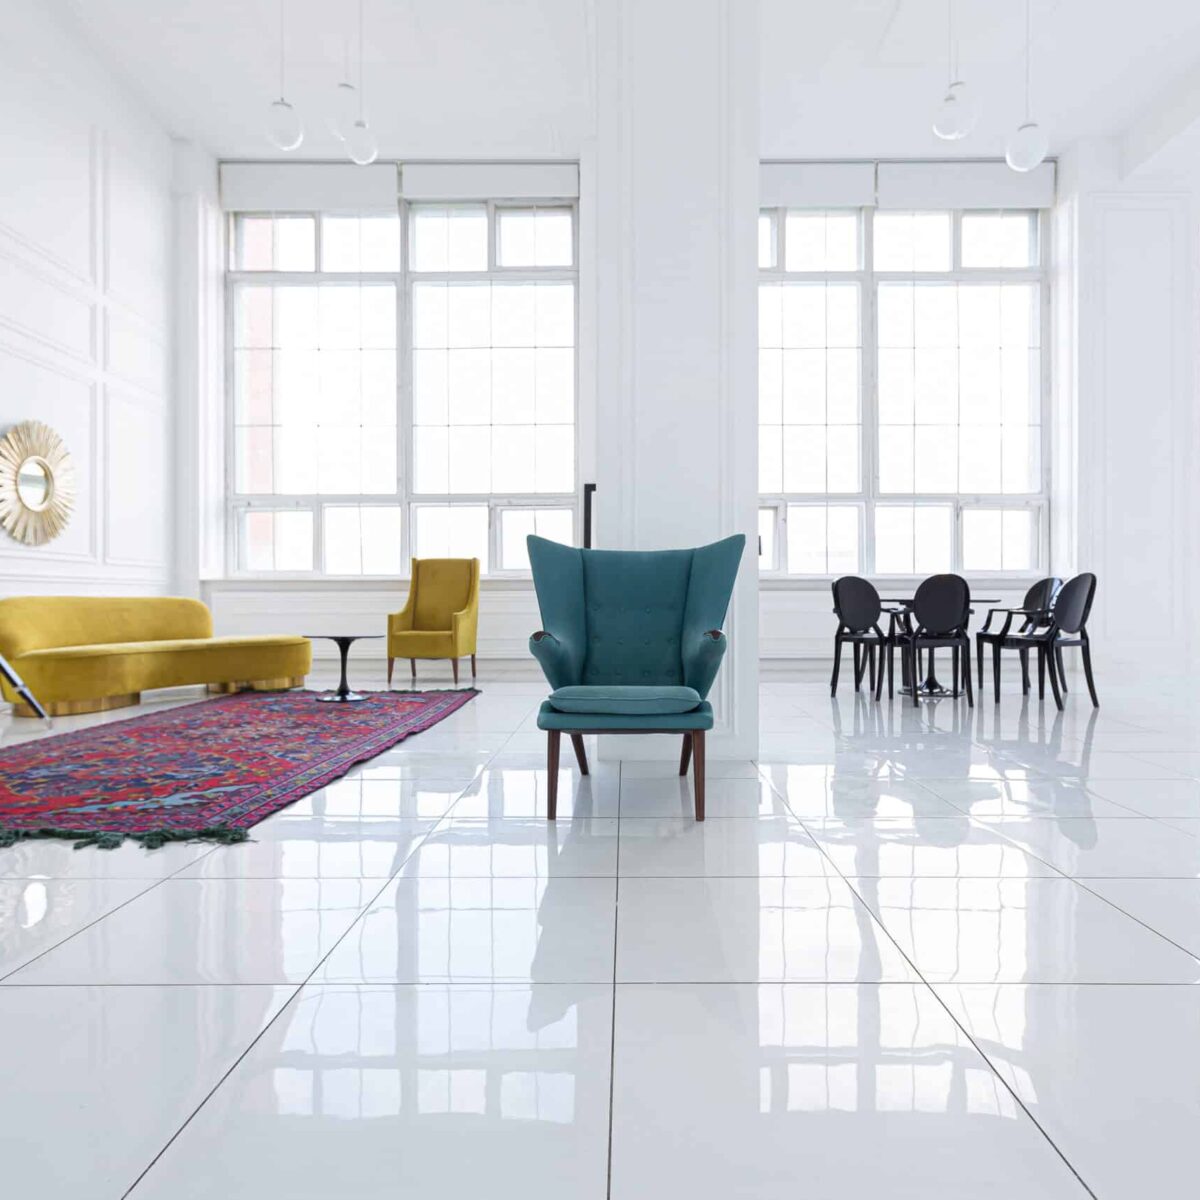 modern fashionable futuristic interior design of a spacious white hall with black and yellow furniture white tiles